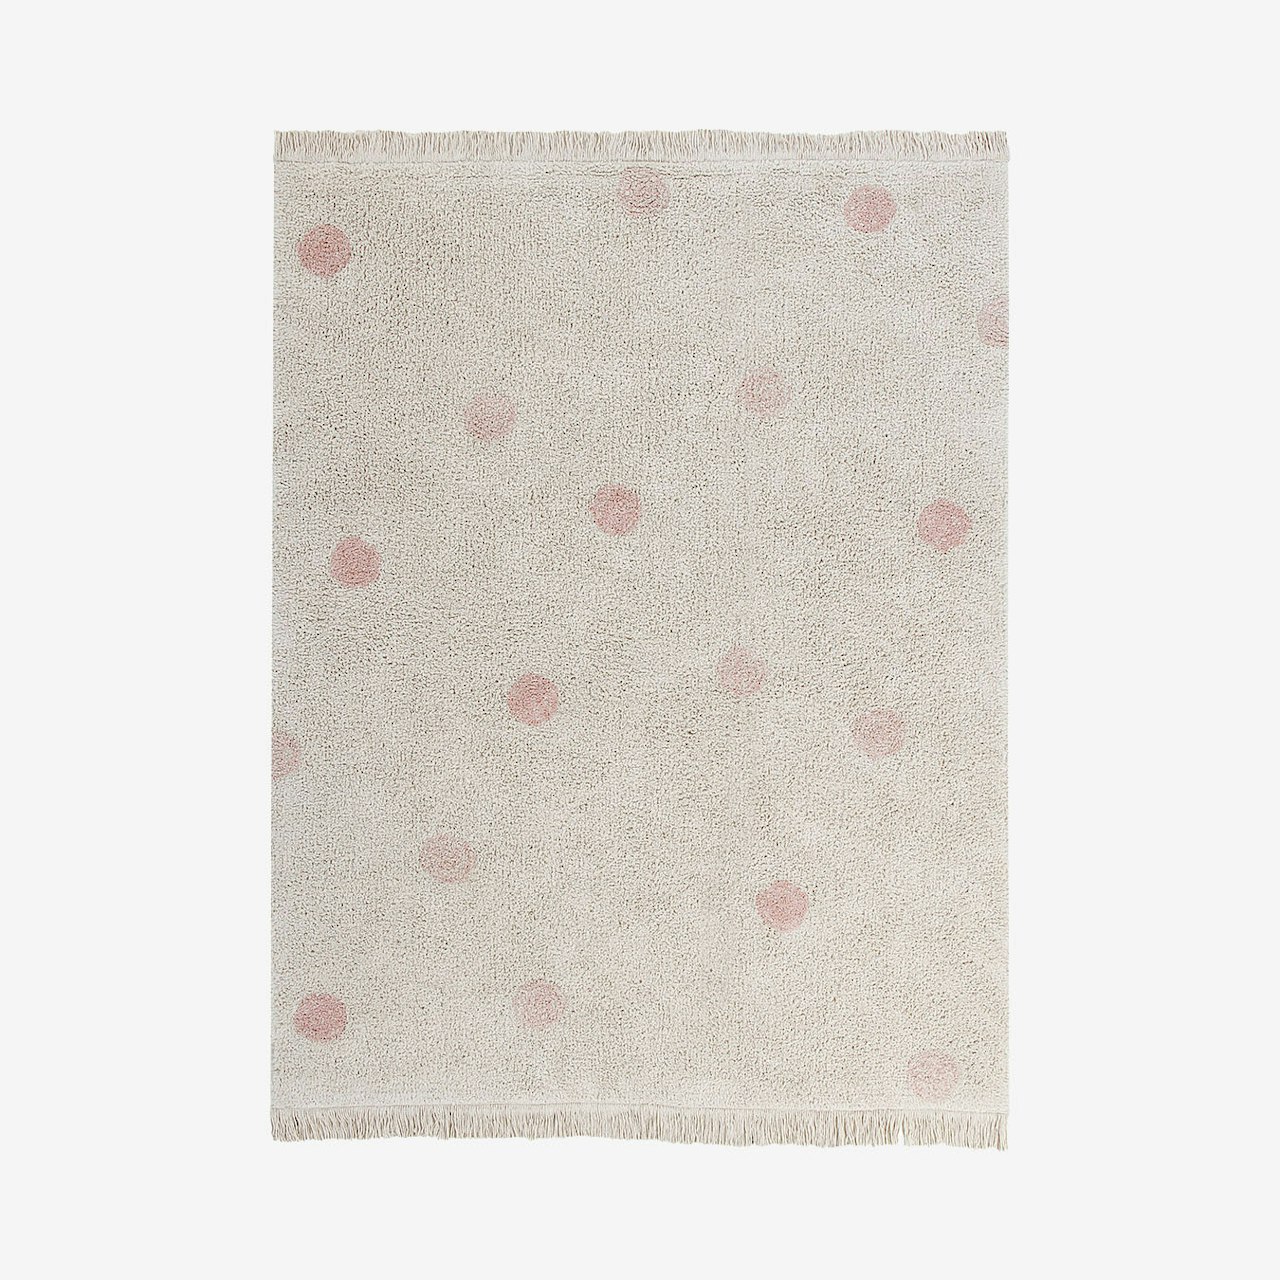 Hippy Dots Rug - Vintage Nude / Pink by Lorena Canals US - Fy